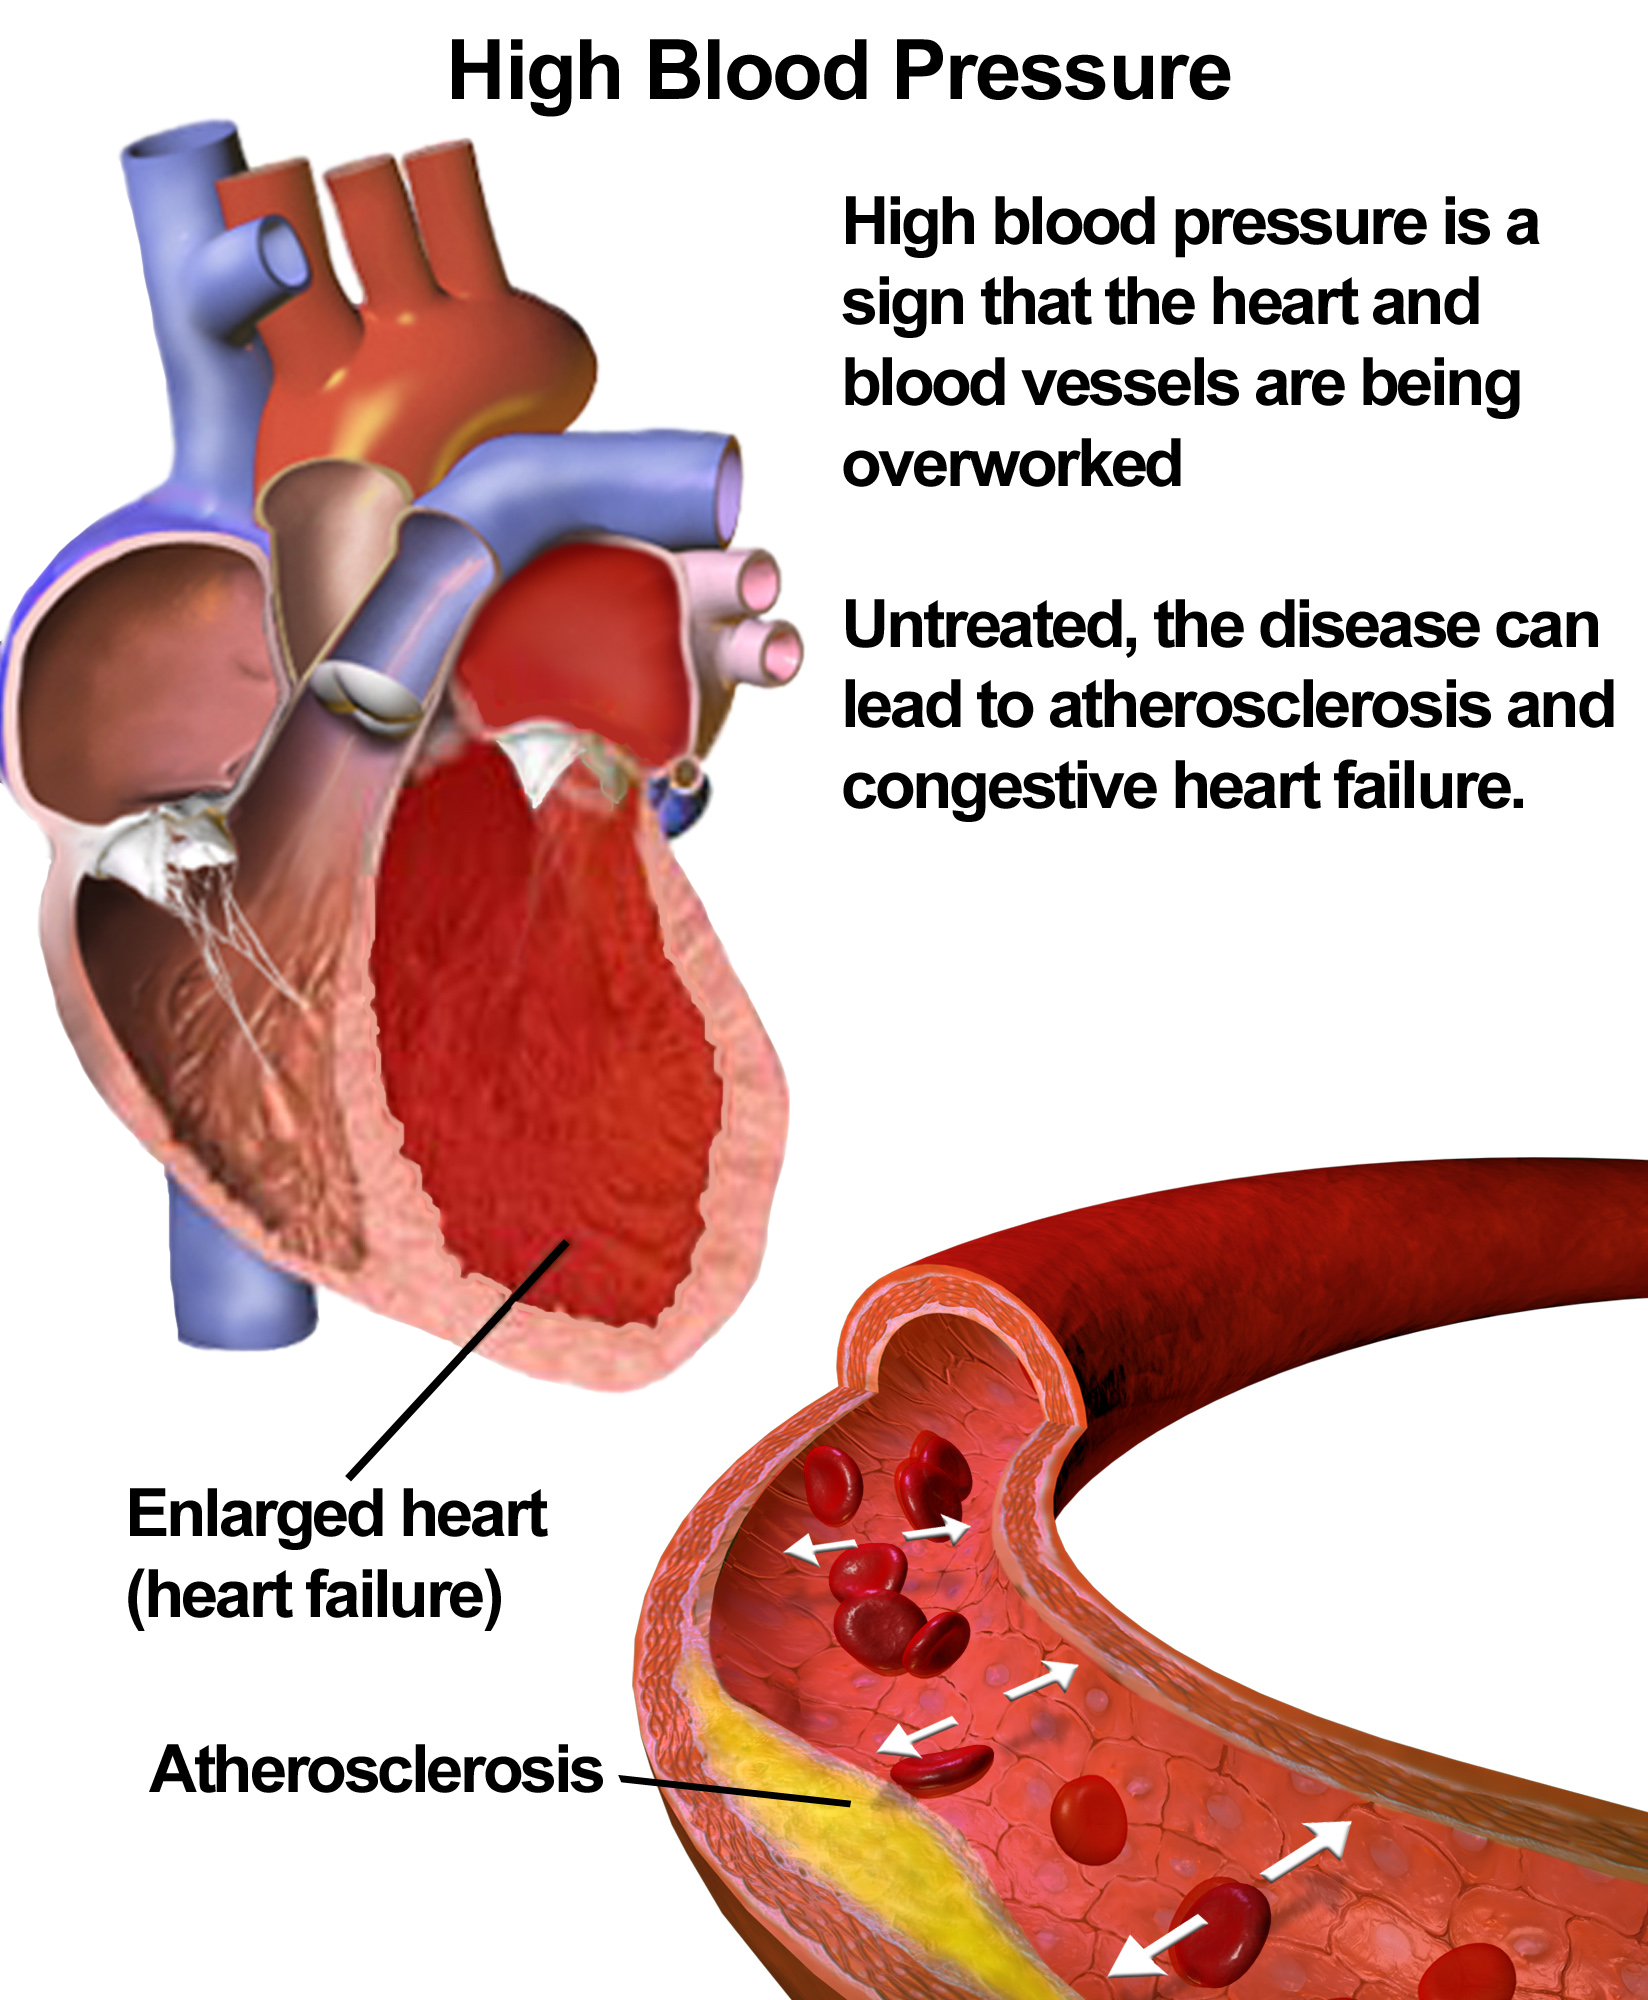 5 Ways Alcohol Affects Your Heart